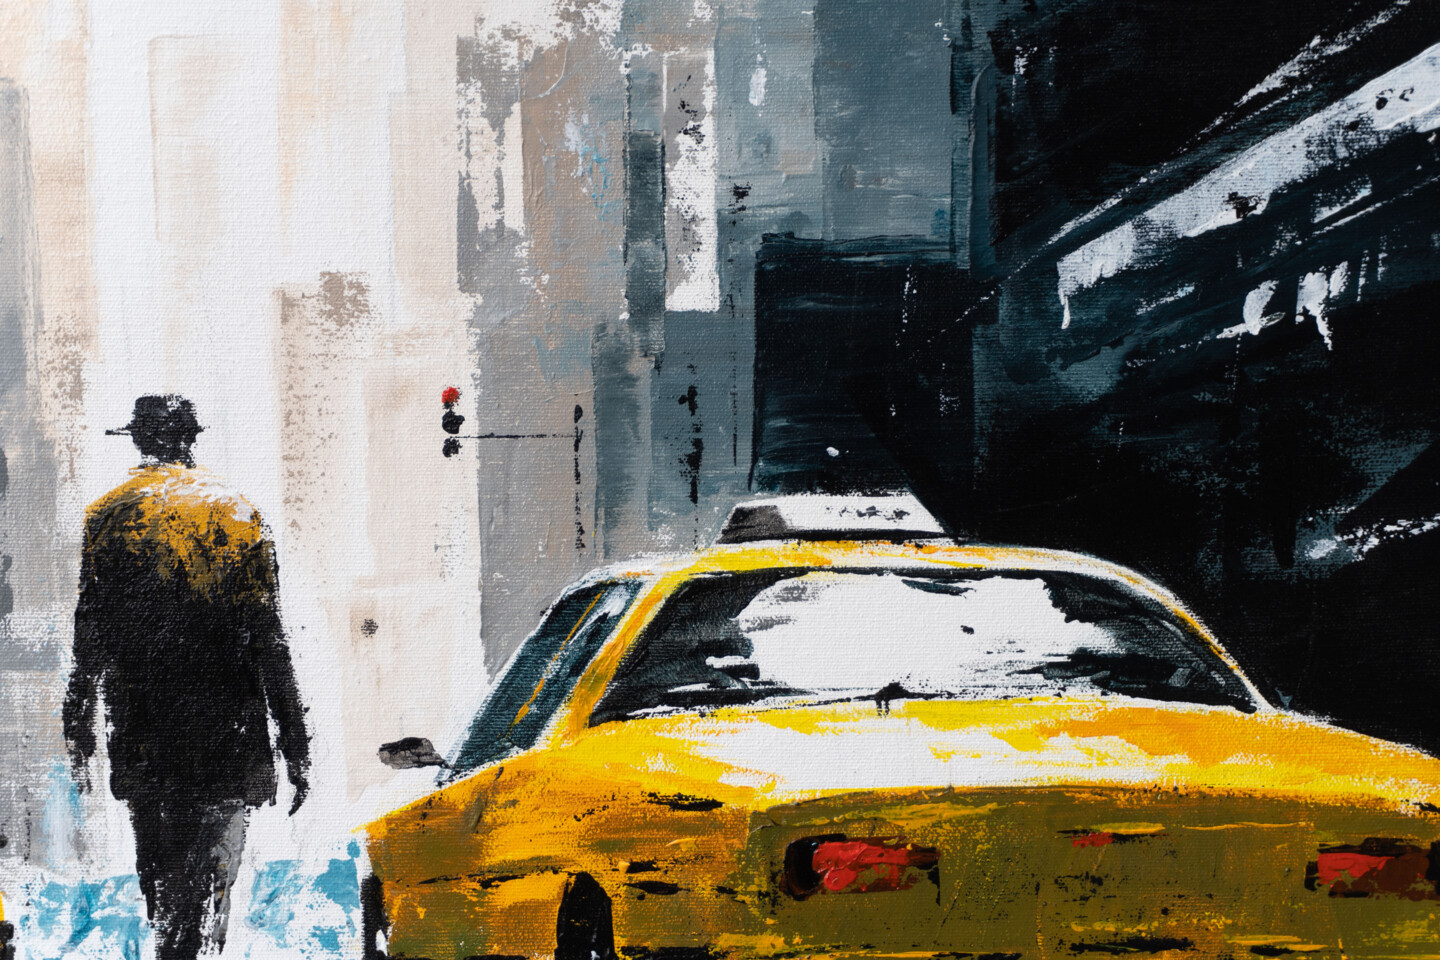 Yellow Taxi Rush: Capturing The Energy , Painting by Yuriy Kraft